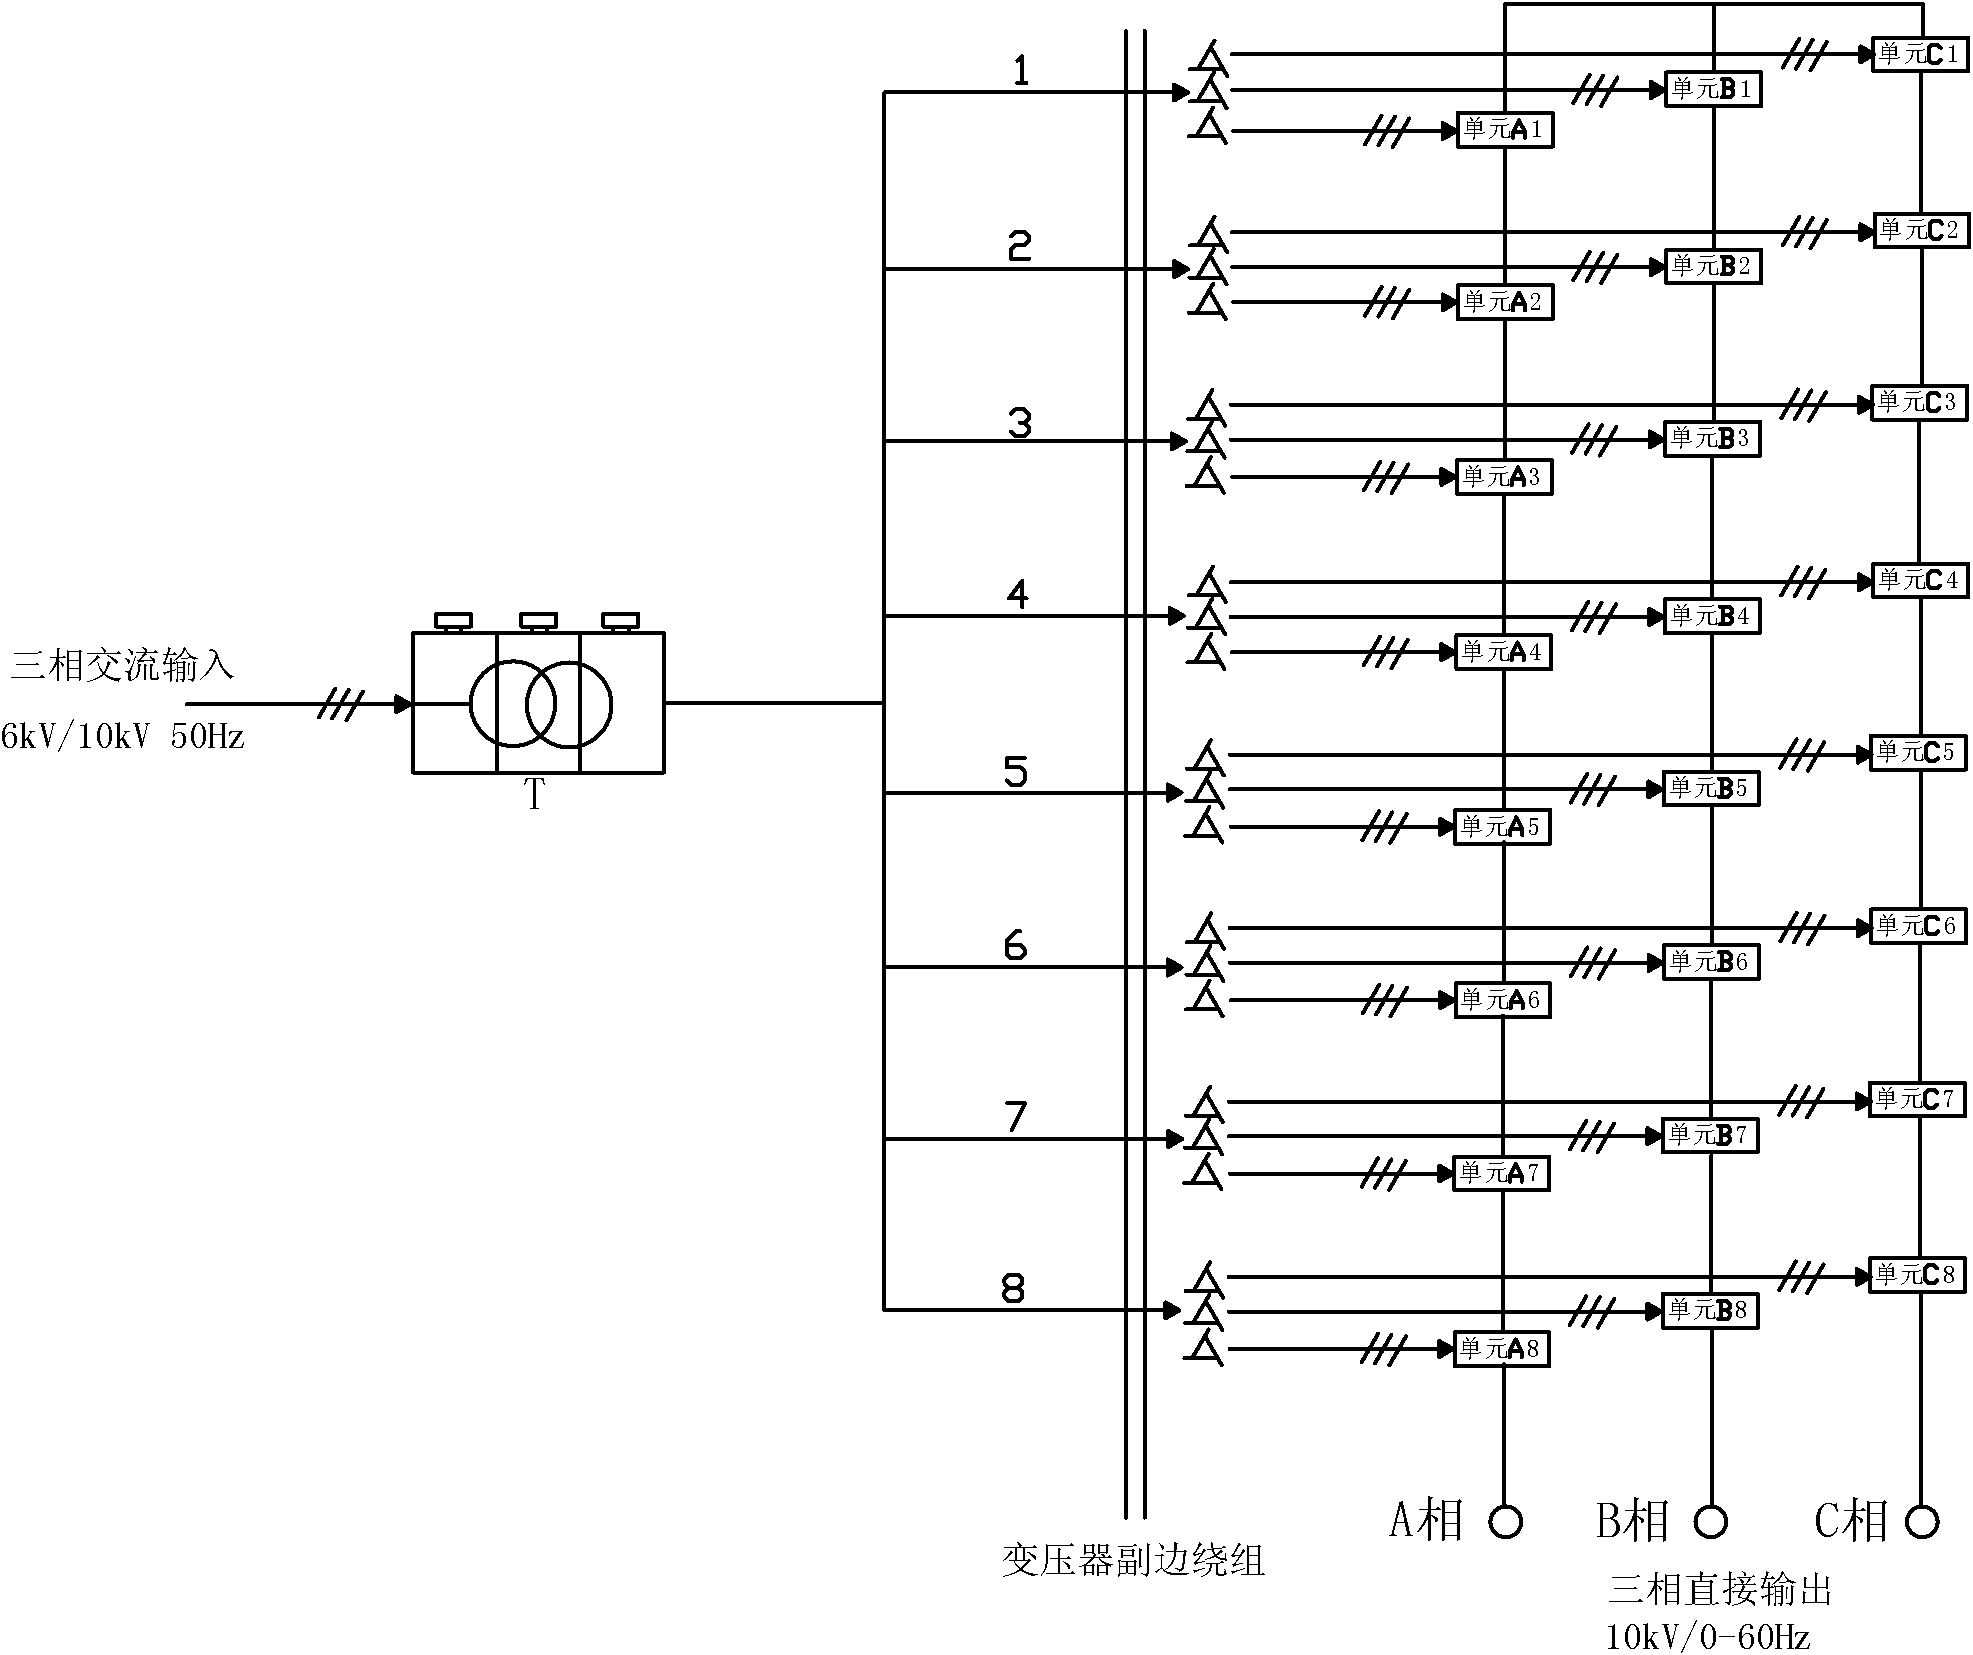 Shore-based variable frequency power supply system